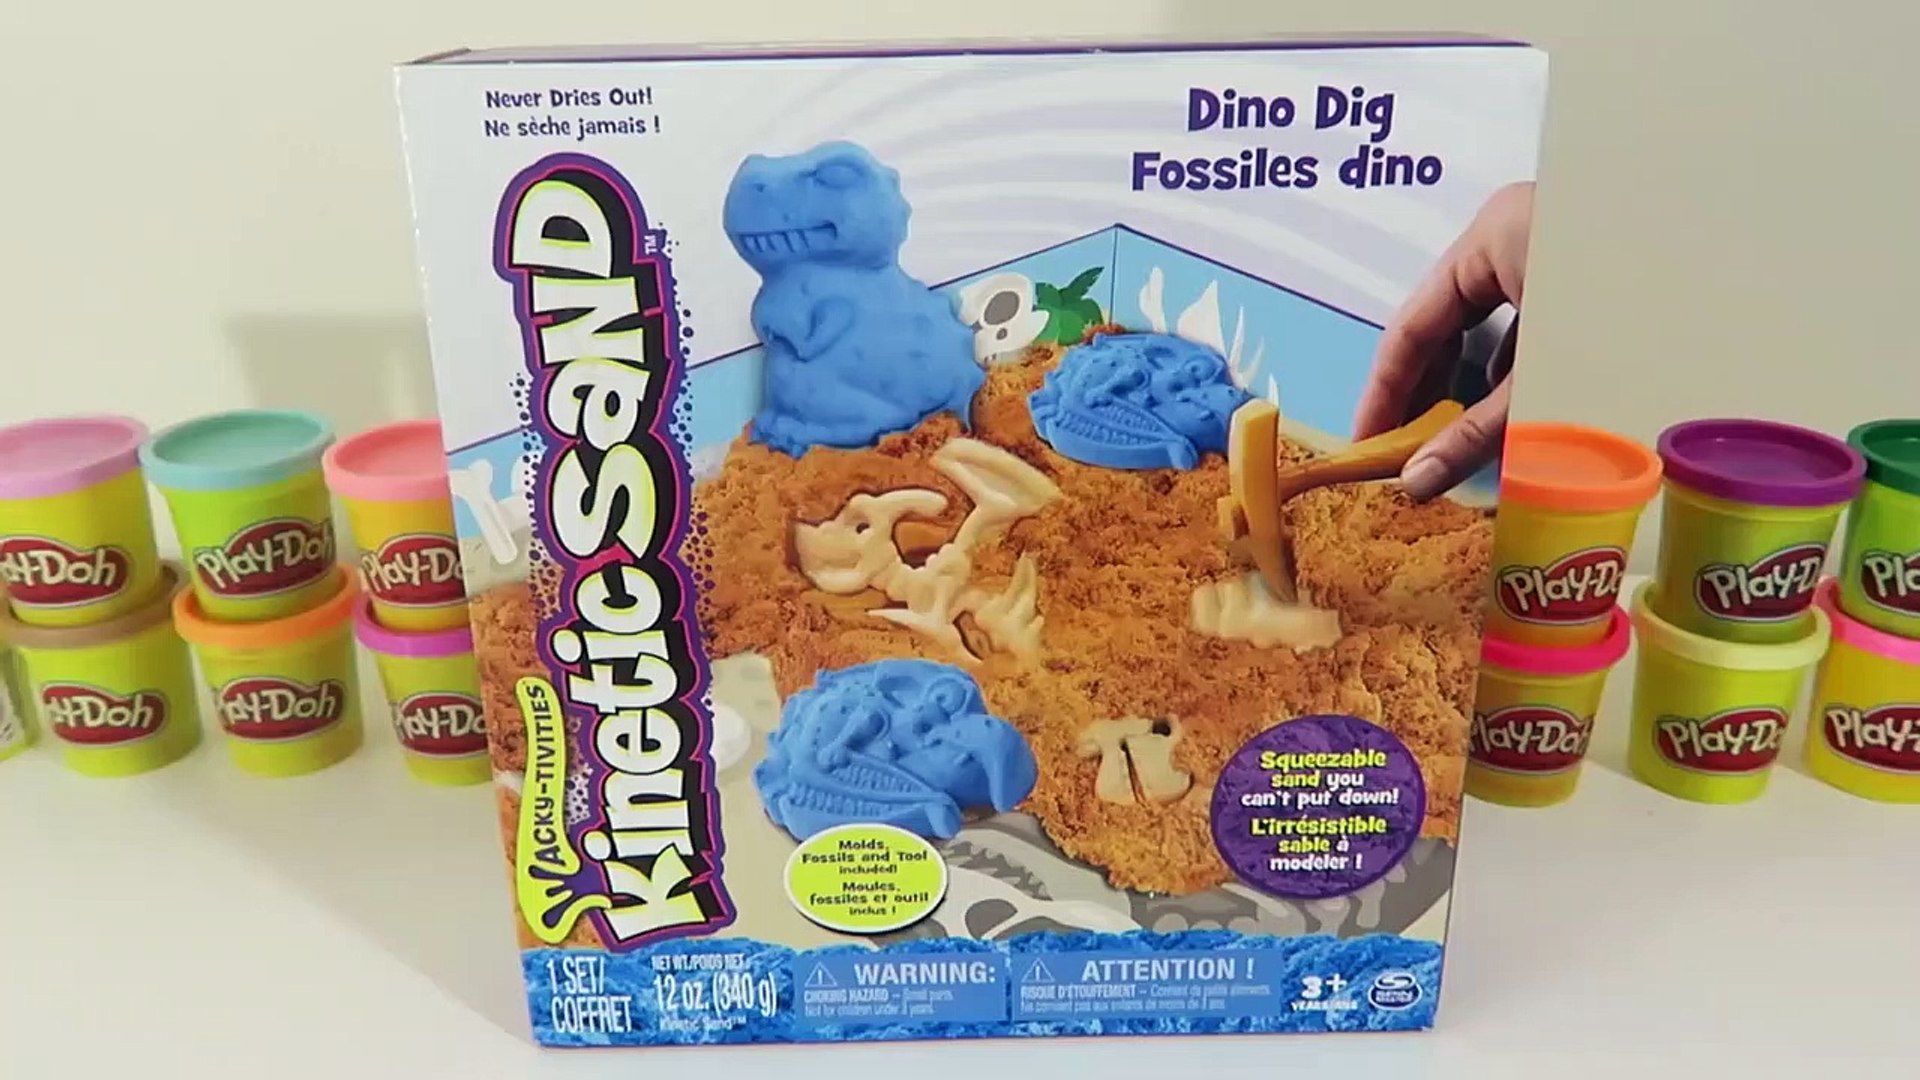 Playing with Kinetic Sand and Dinosaurs and Plastic Eggs